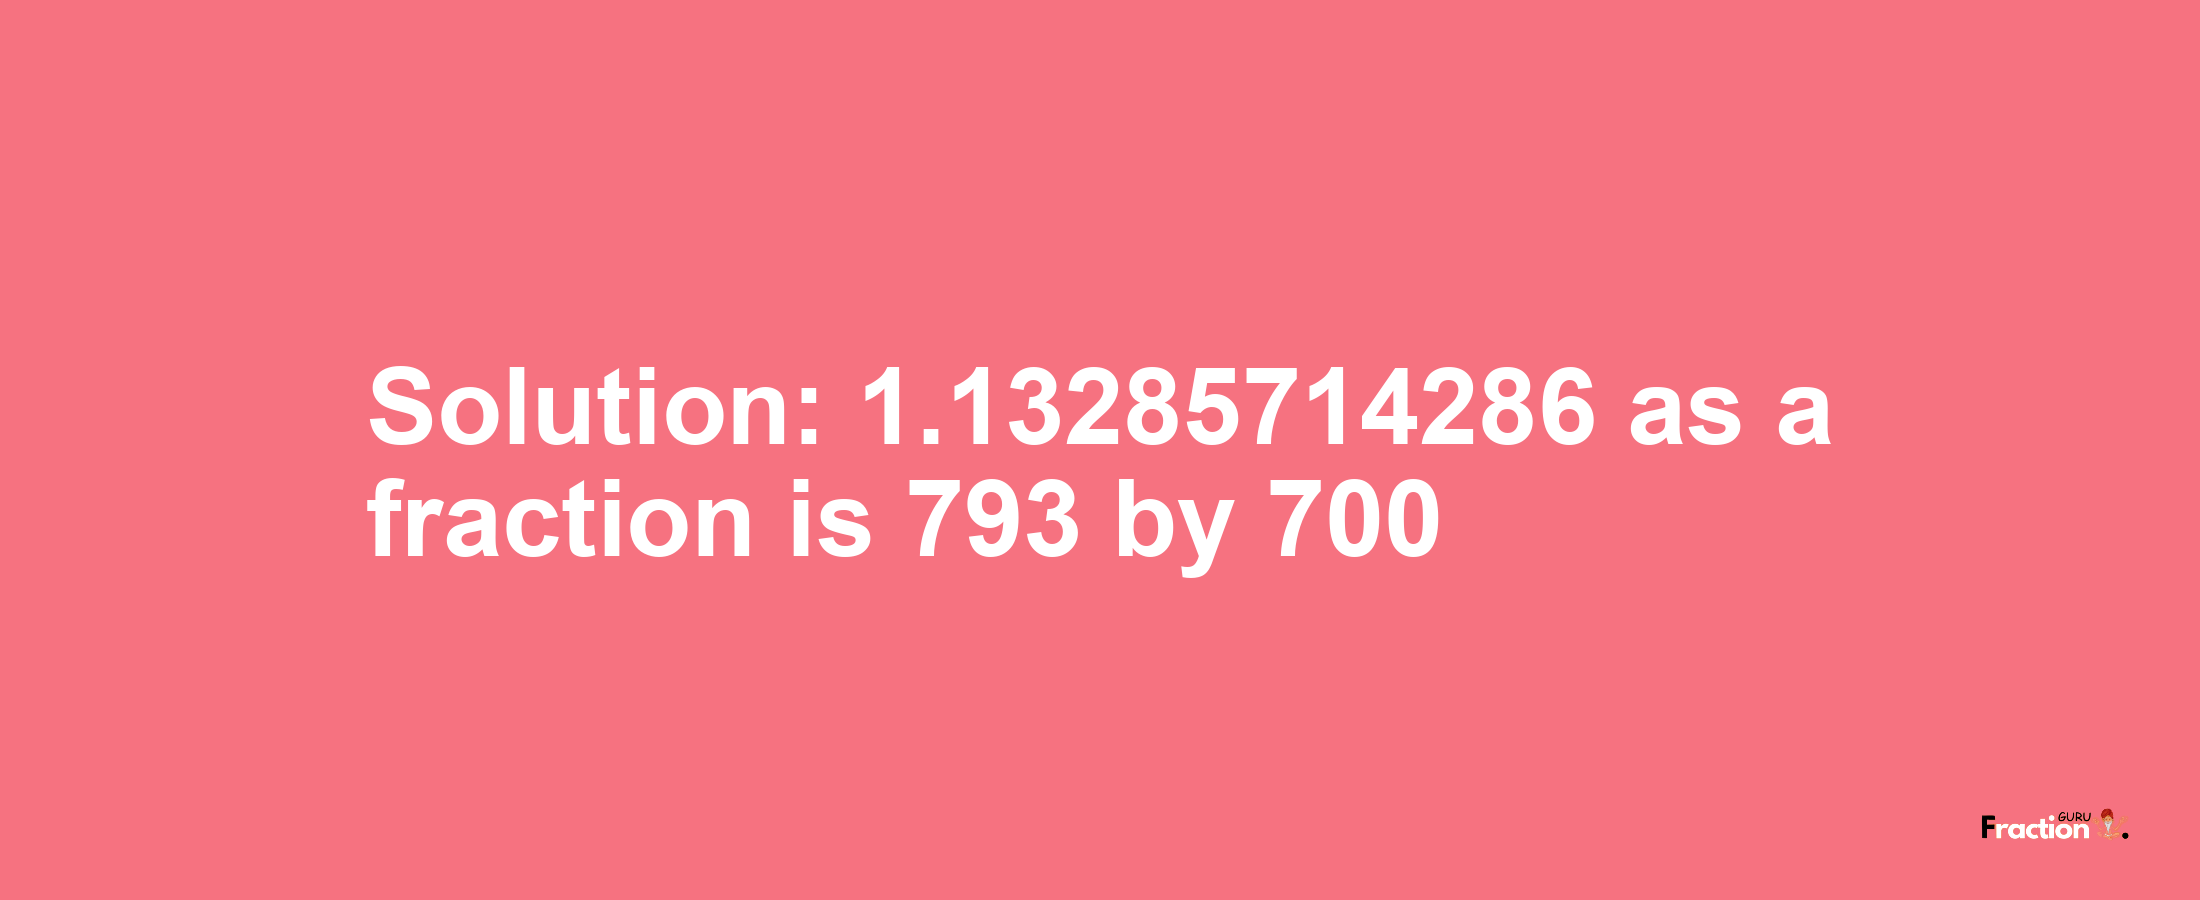 Solution:1.13285714286 as a fraction is 793/700